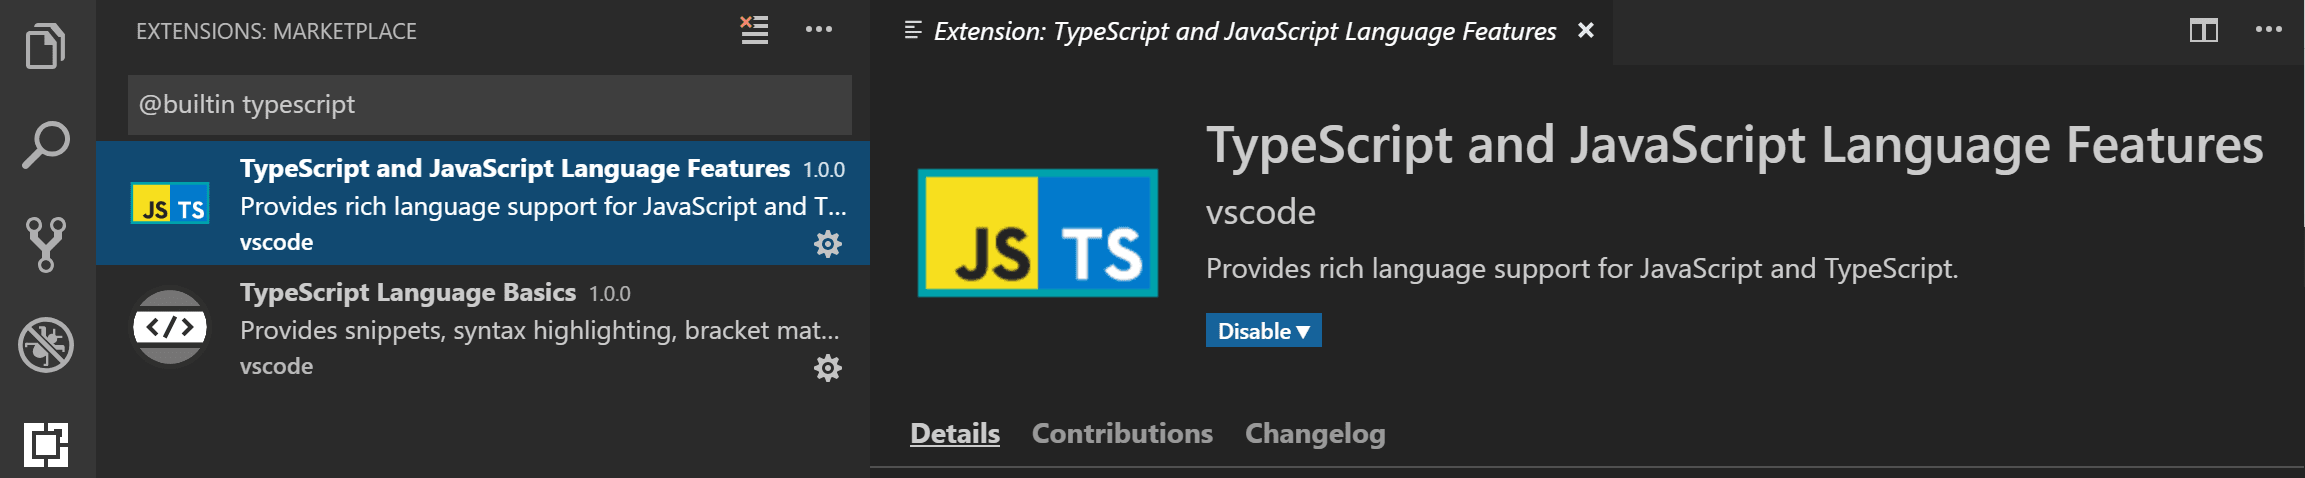 TypeScript and JavaScript Language Features extension